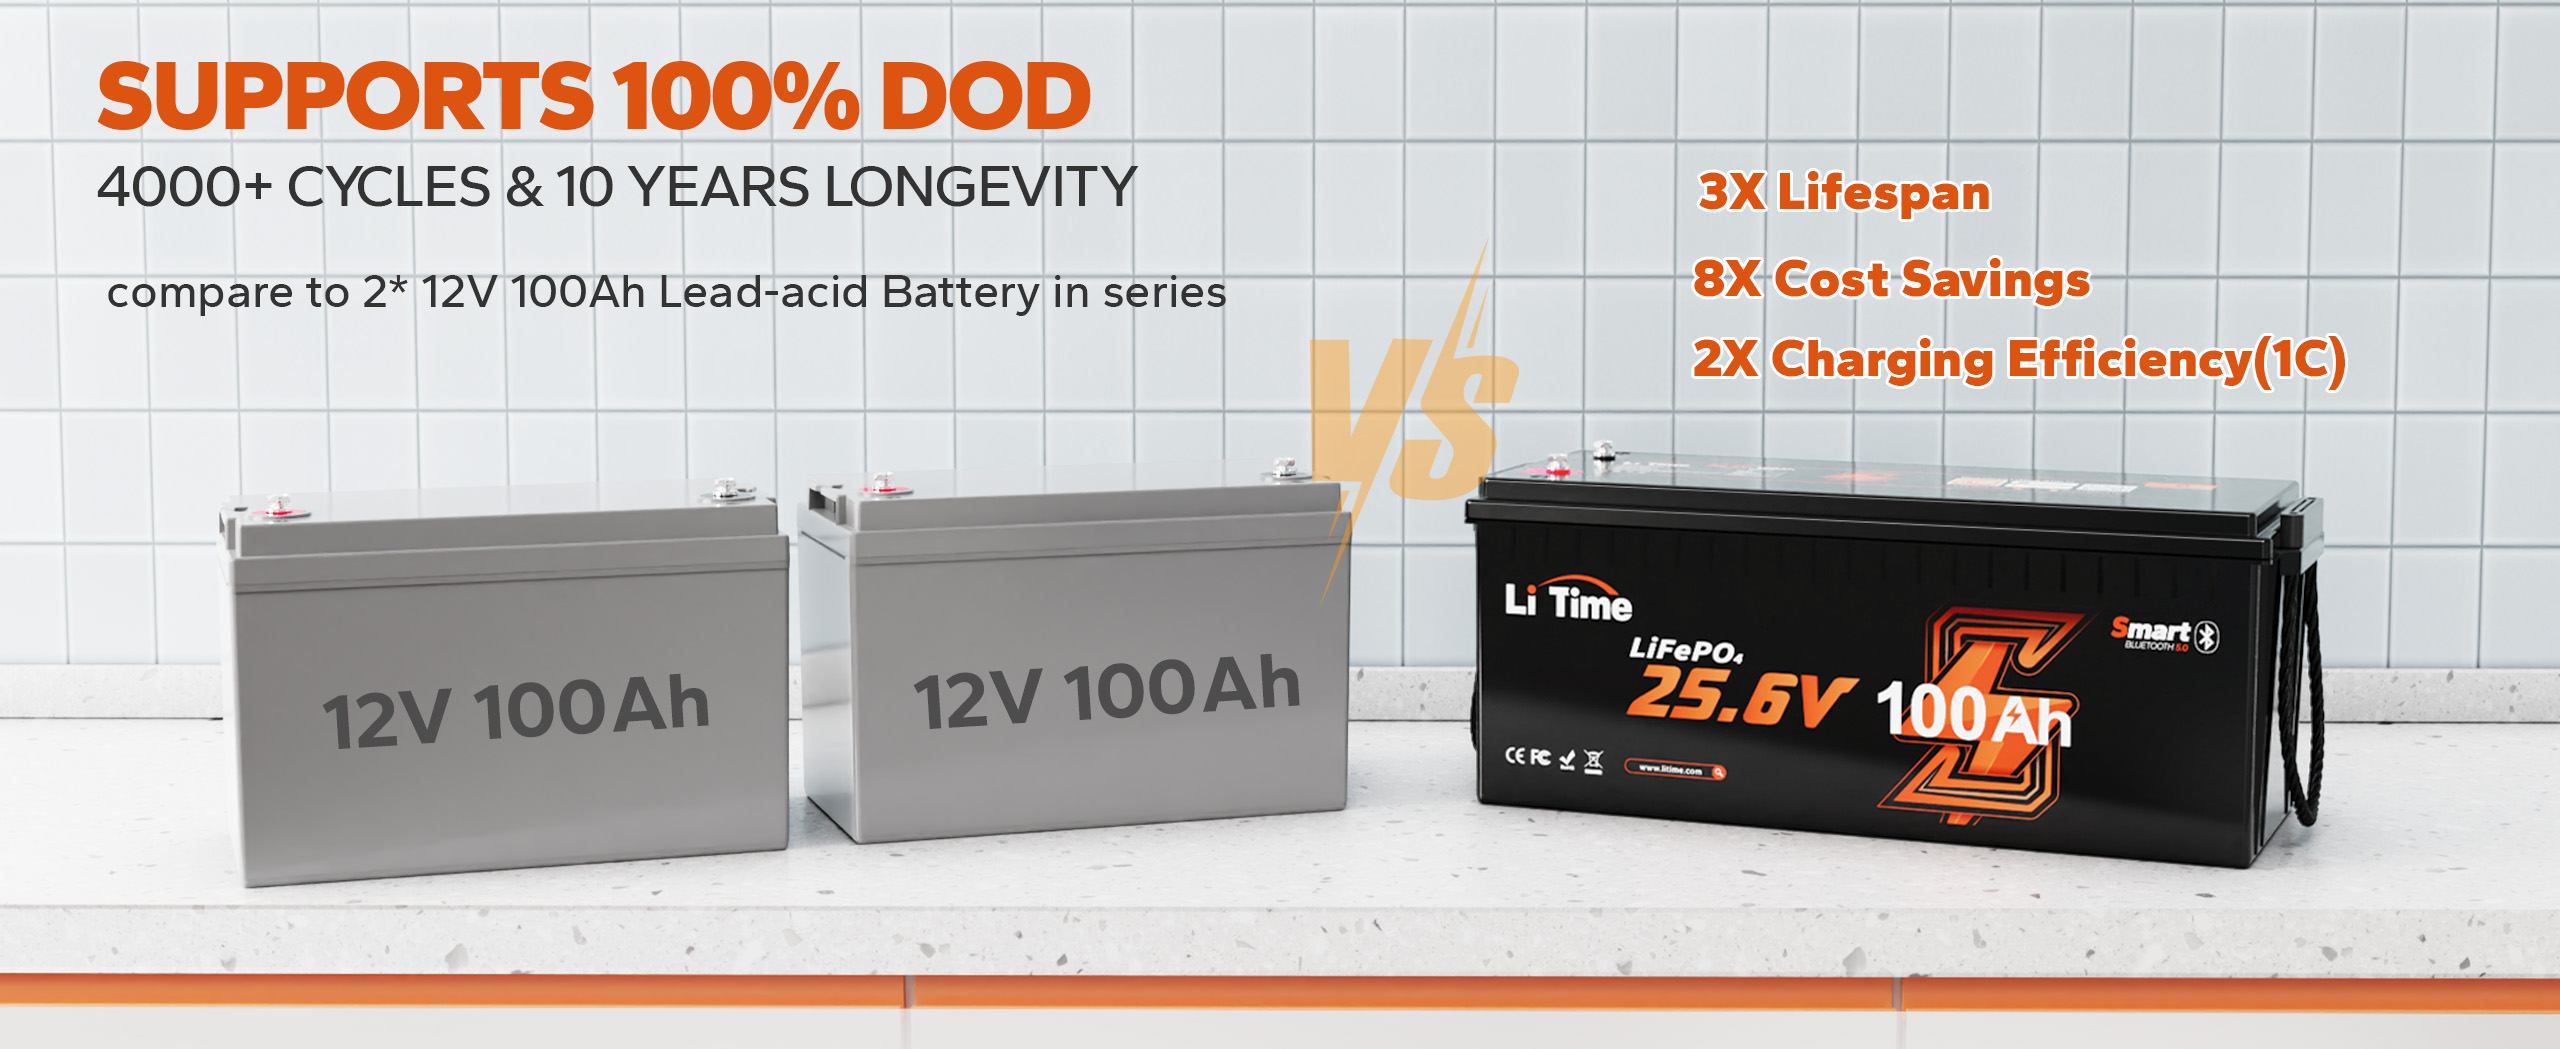 the perfect replacement of lead-acid battery: deep cycle 24V battery with 4000+cycles and 10 years lifespan